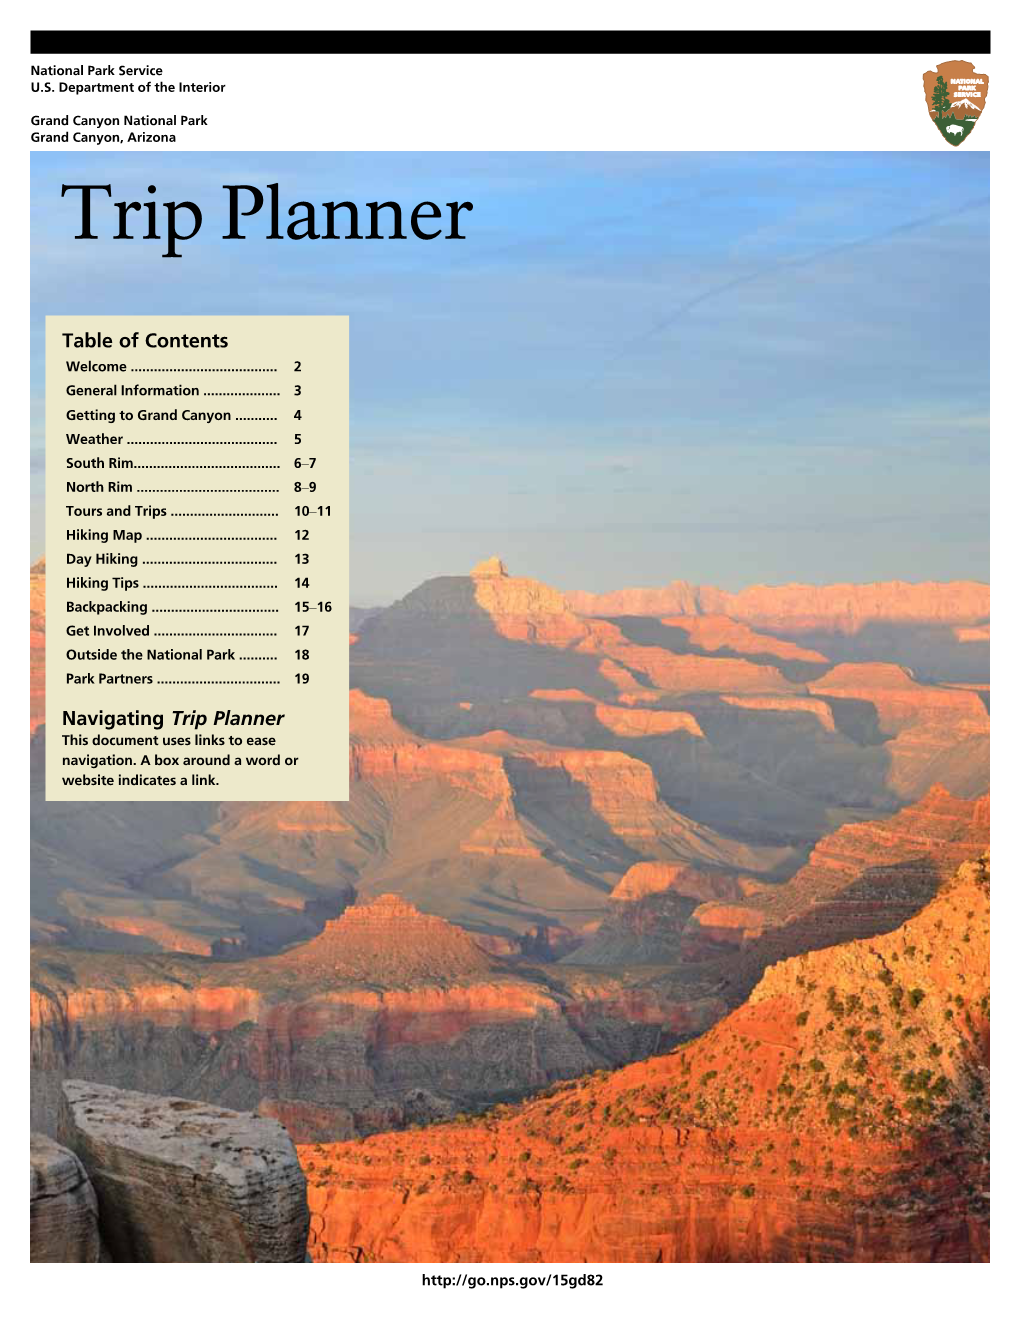 2013 Grand Canyon National Park Trip Planner